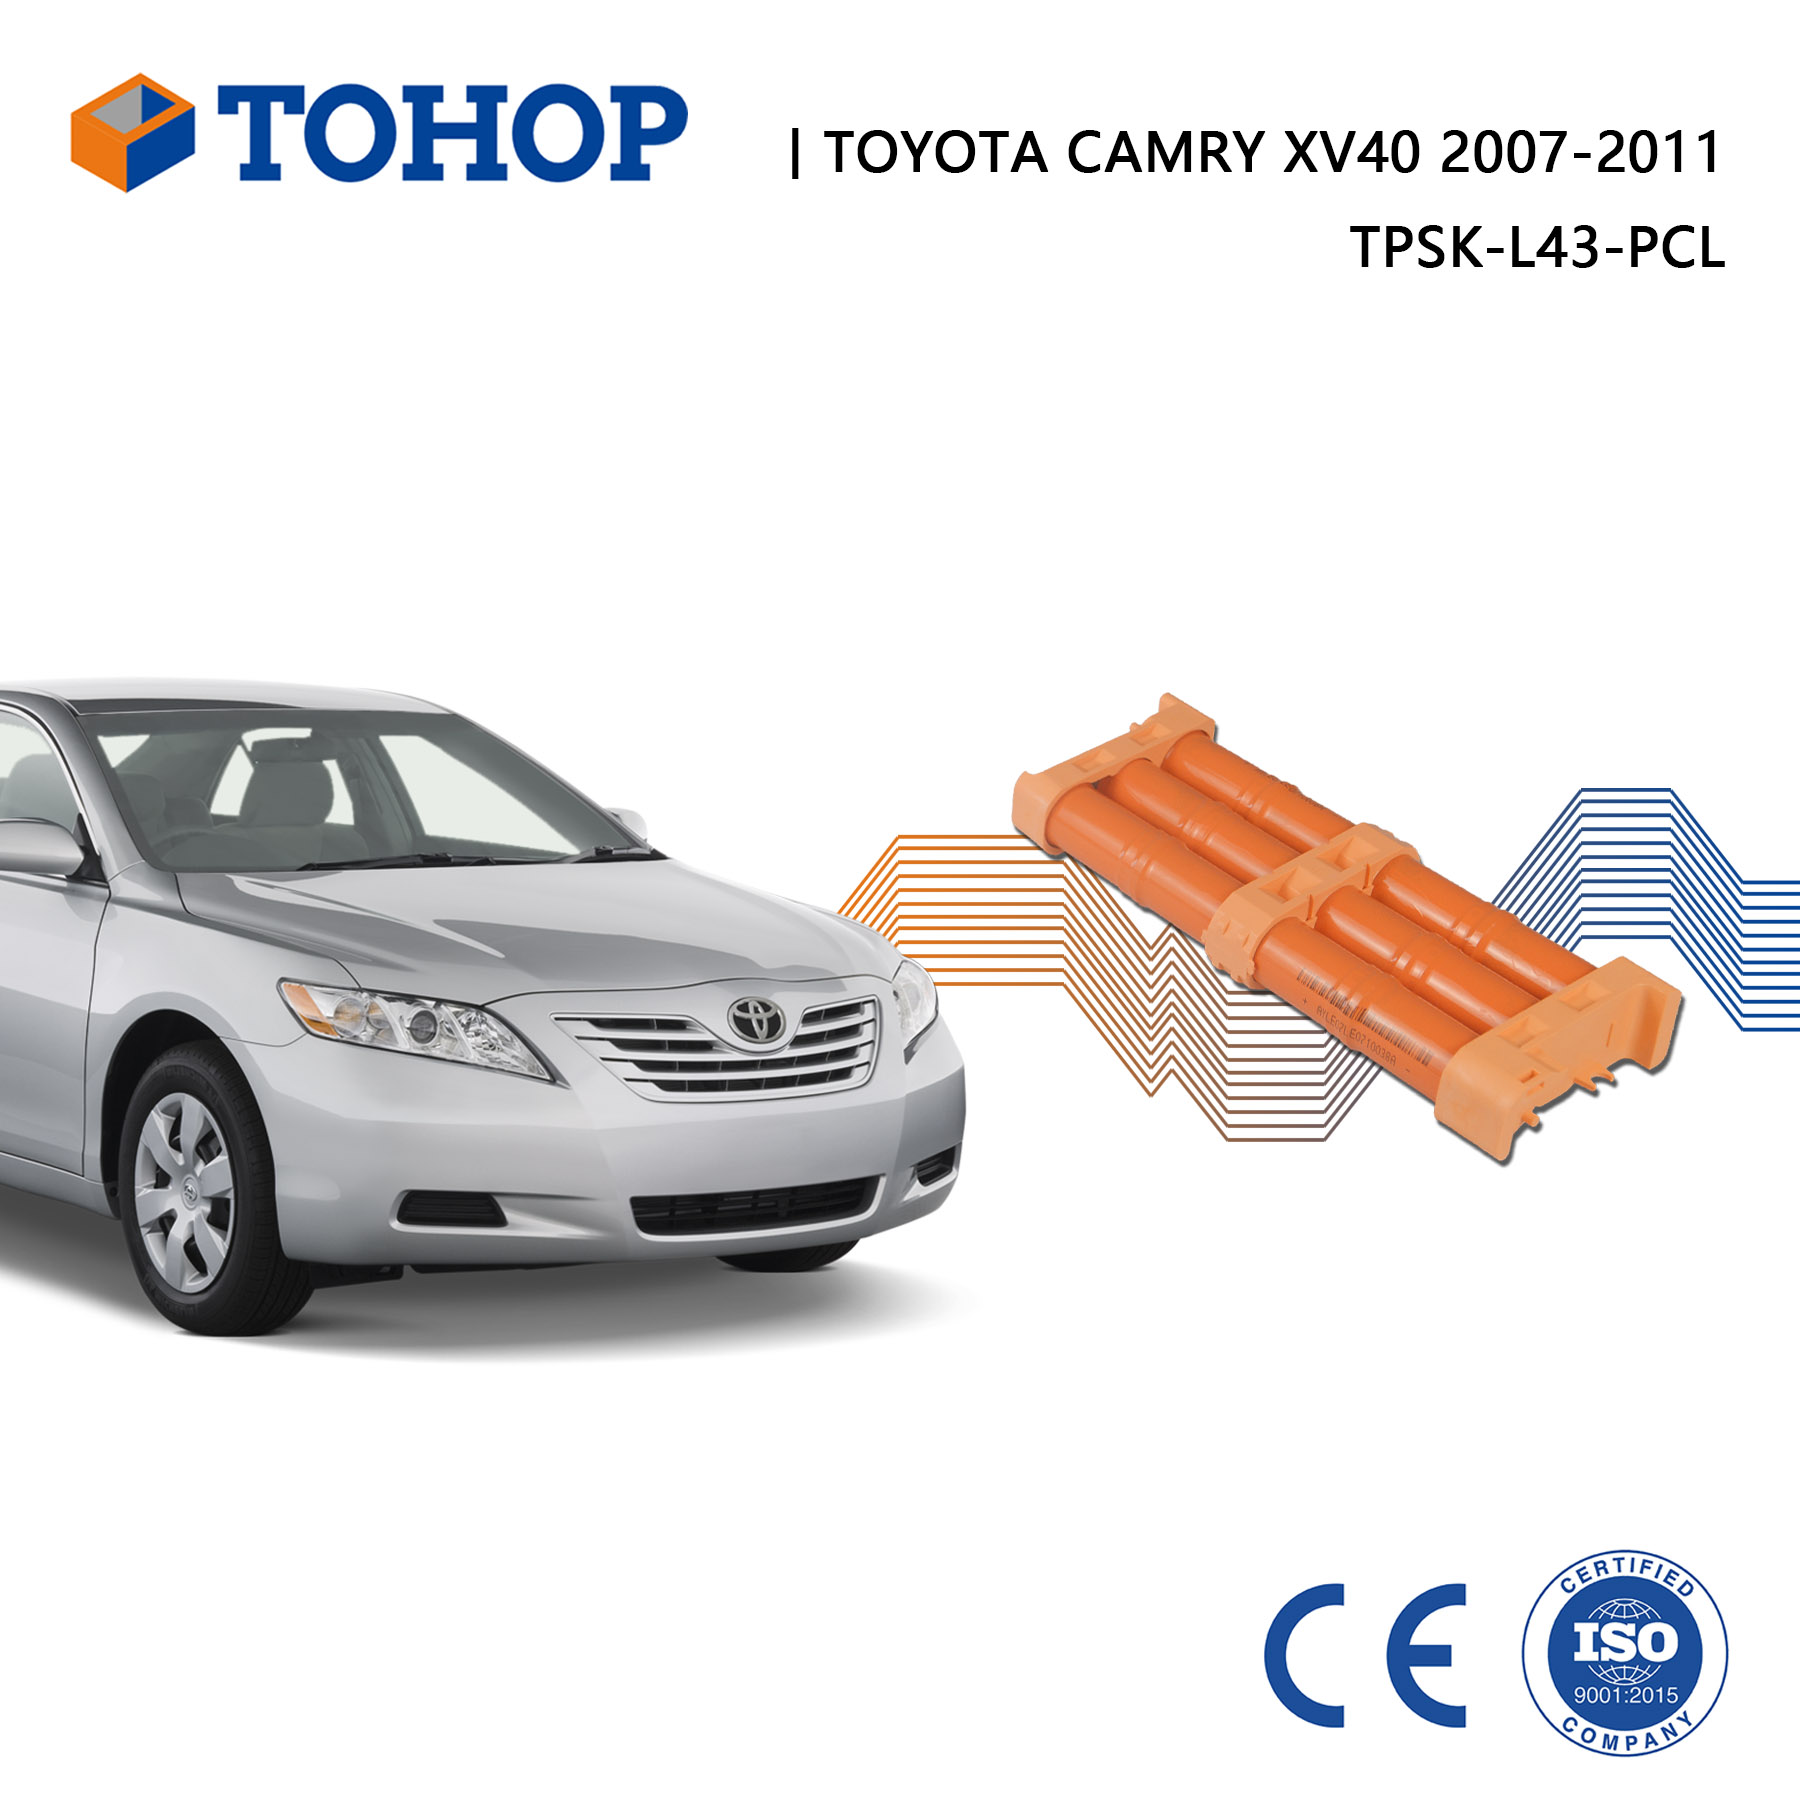 Toyota Camry XV40 Remplacement Hybrid Battery 2008 pour véhicule